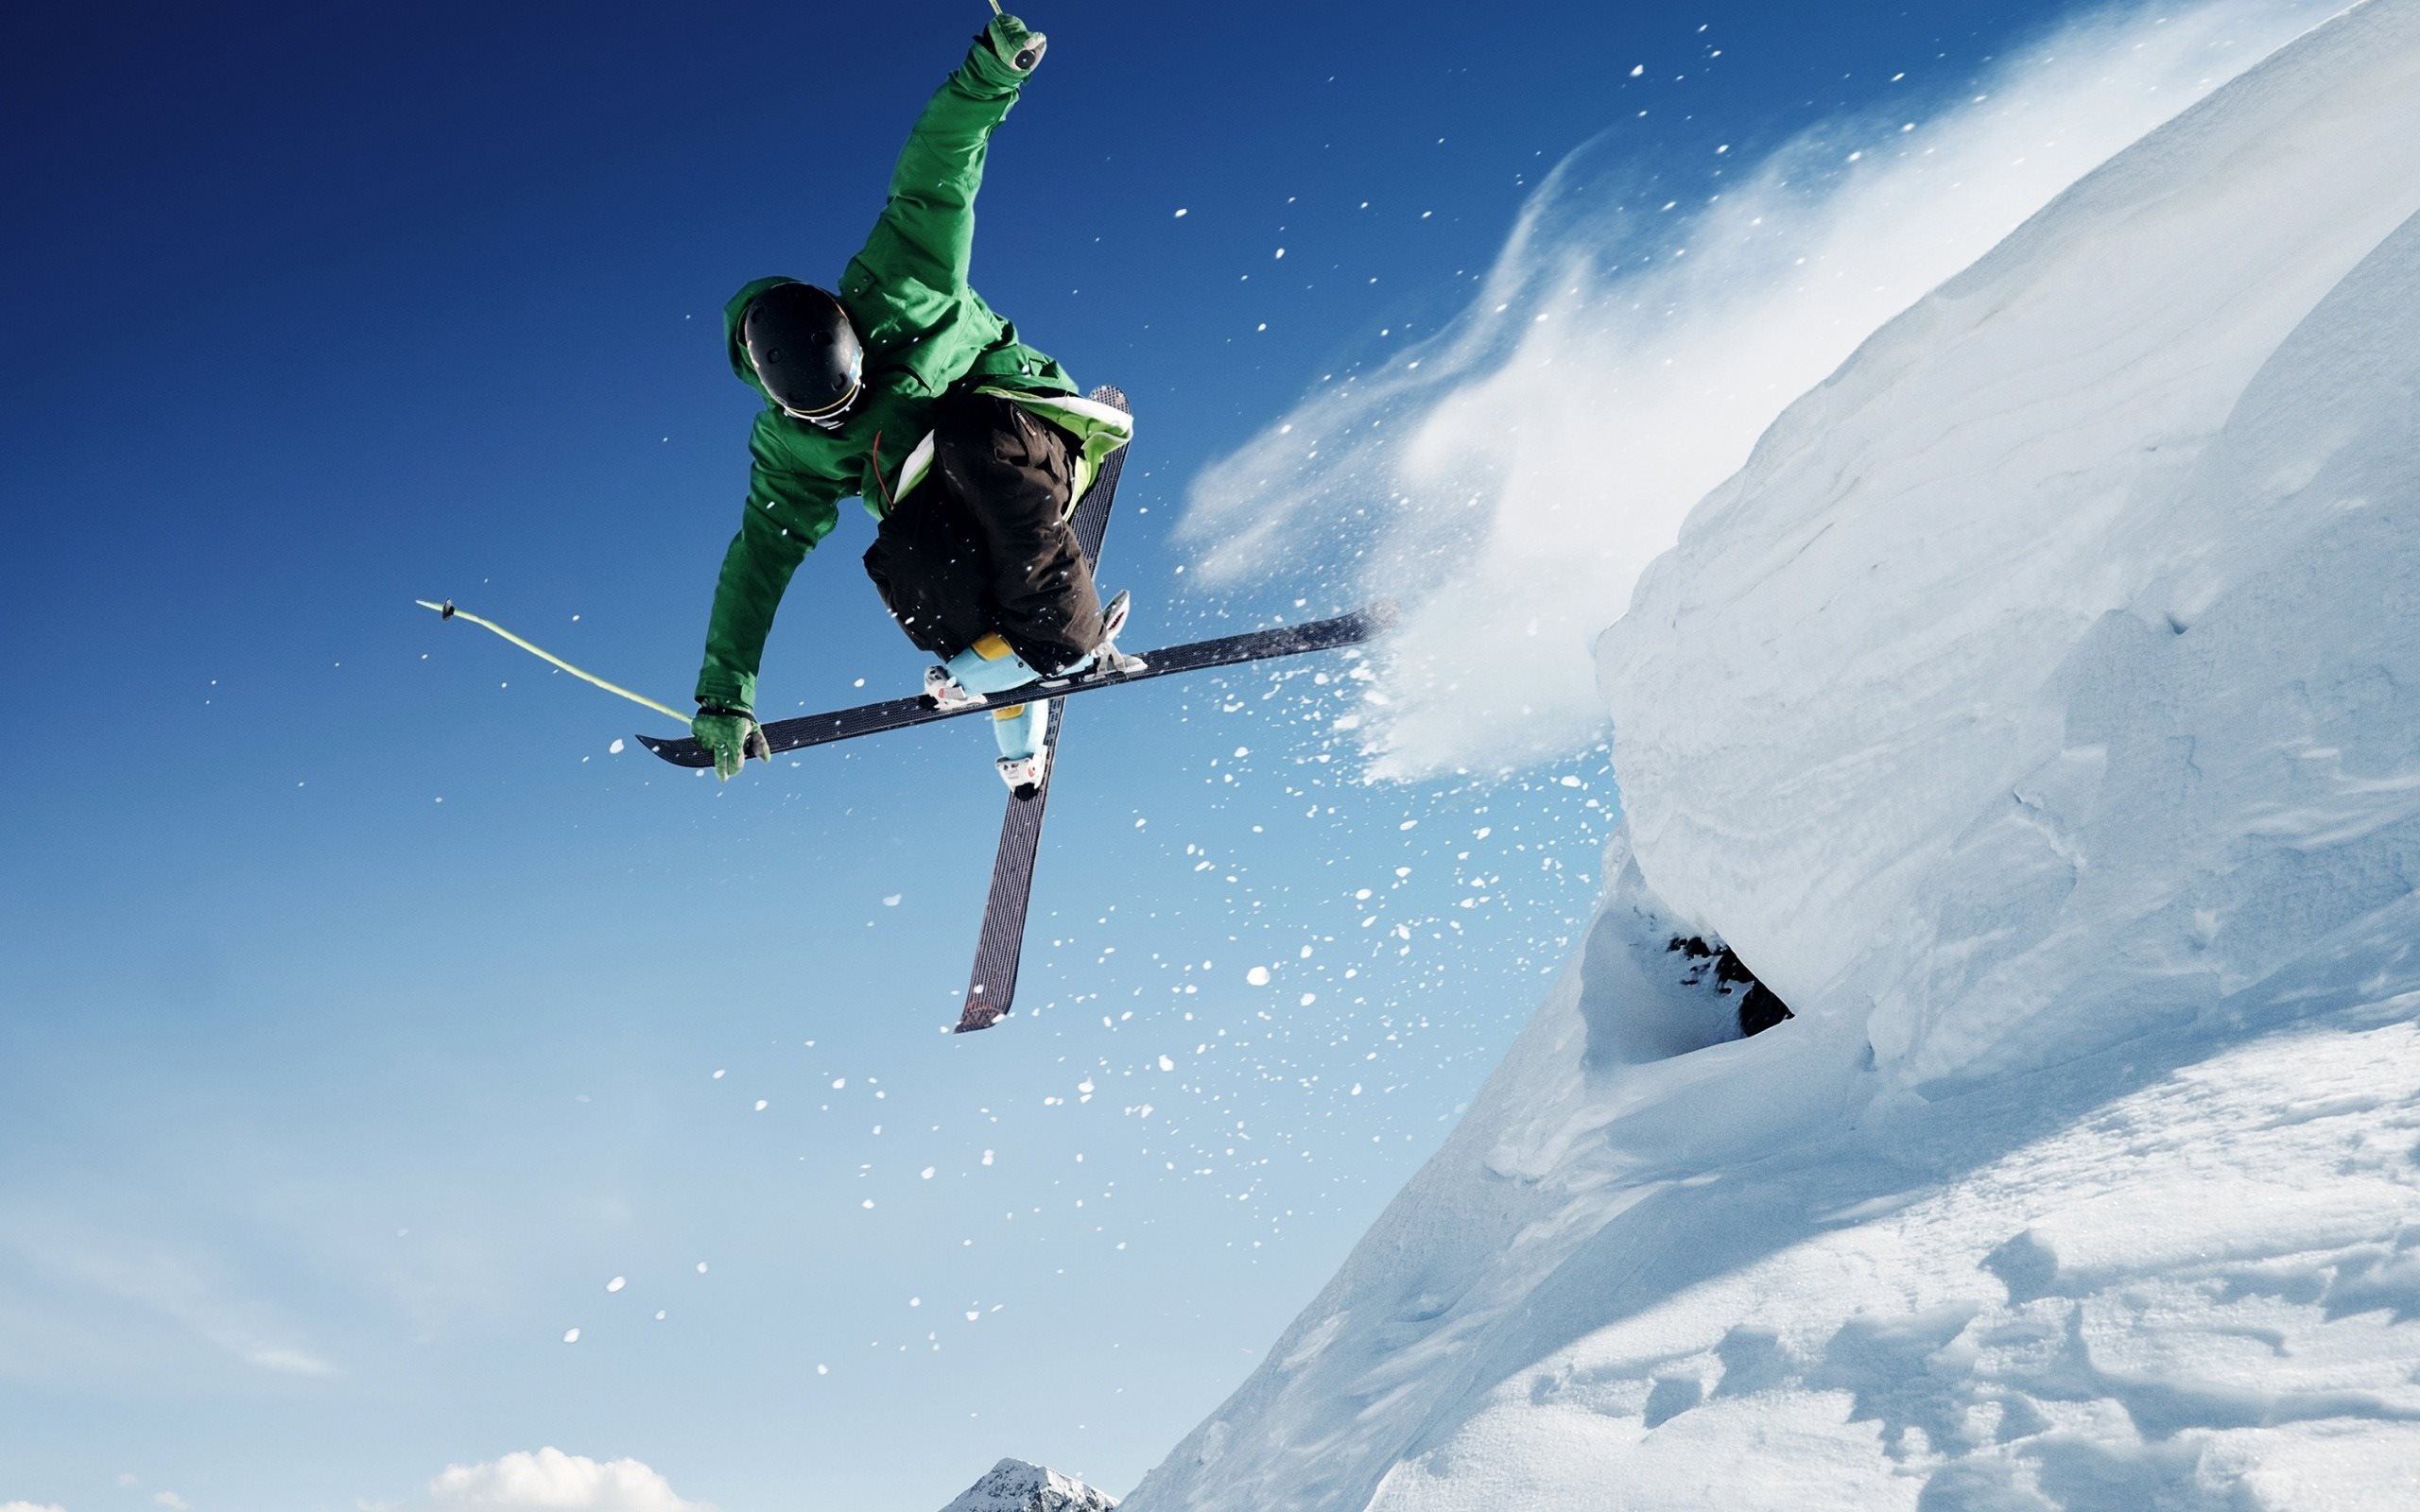 Skiing: Ski jumping, Snow, Winter sports, Extreme sports, Freestyle, Downhill. 2560x1600 HD Background.